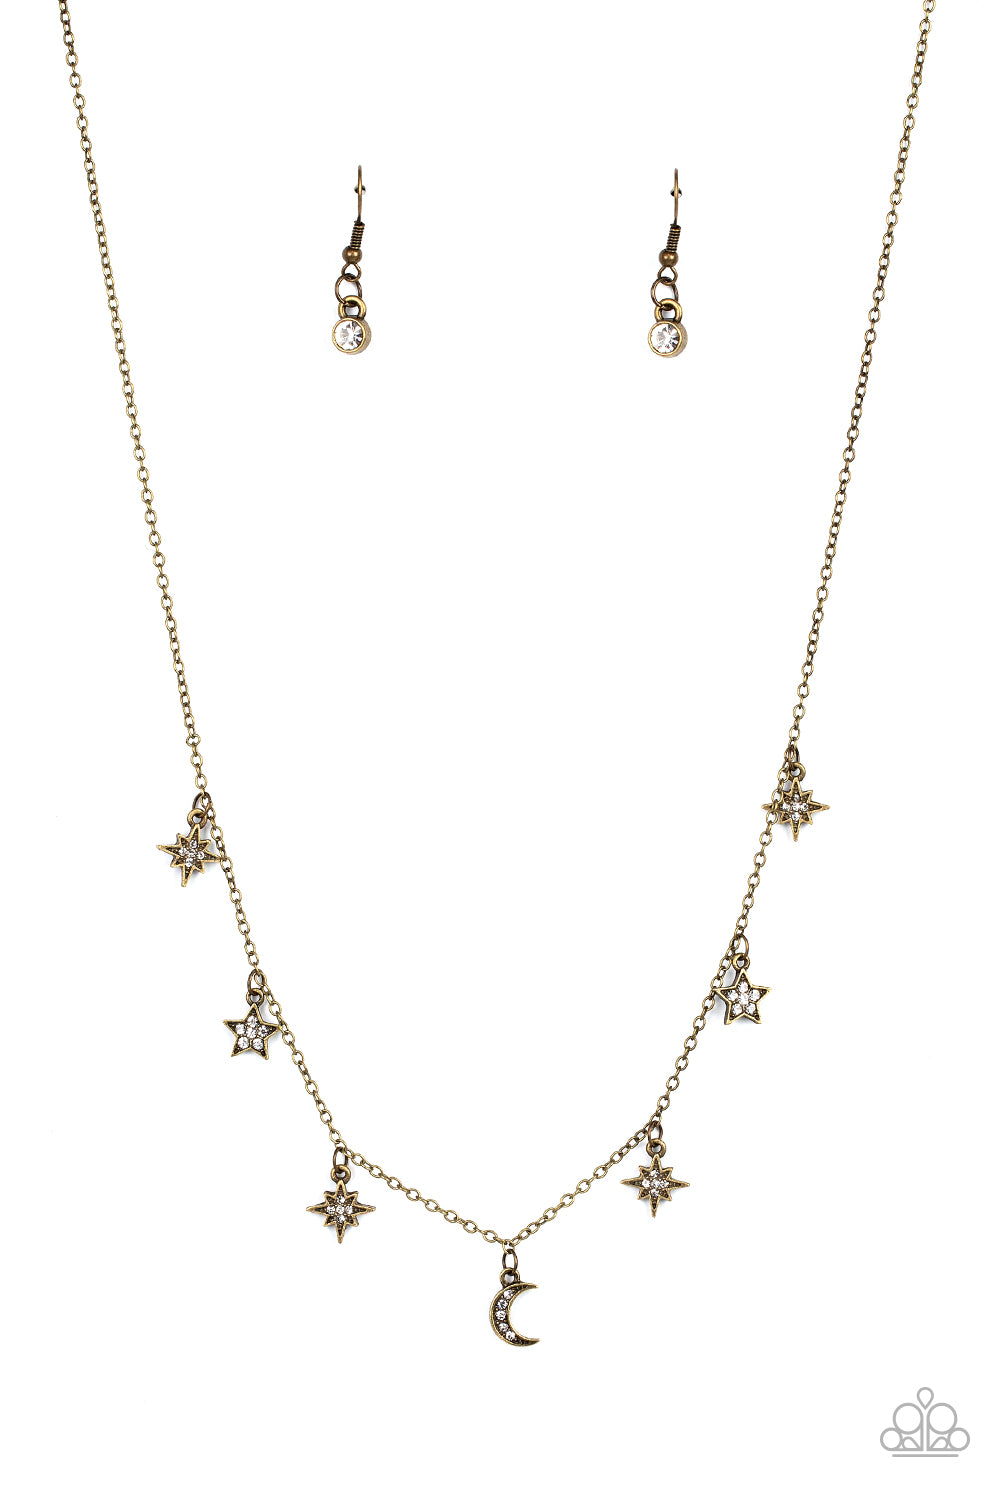 Cosmic Runway Necklace (Brass, Silver, Gold)